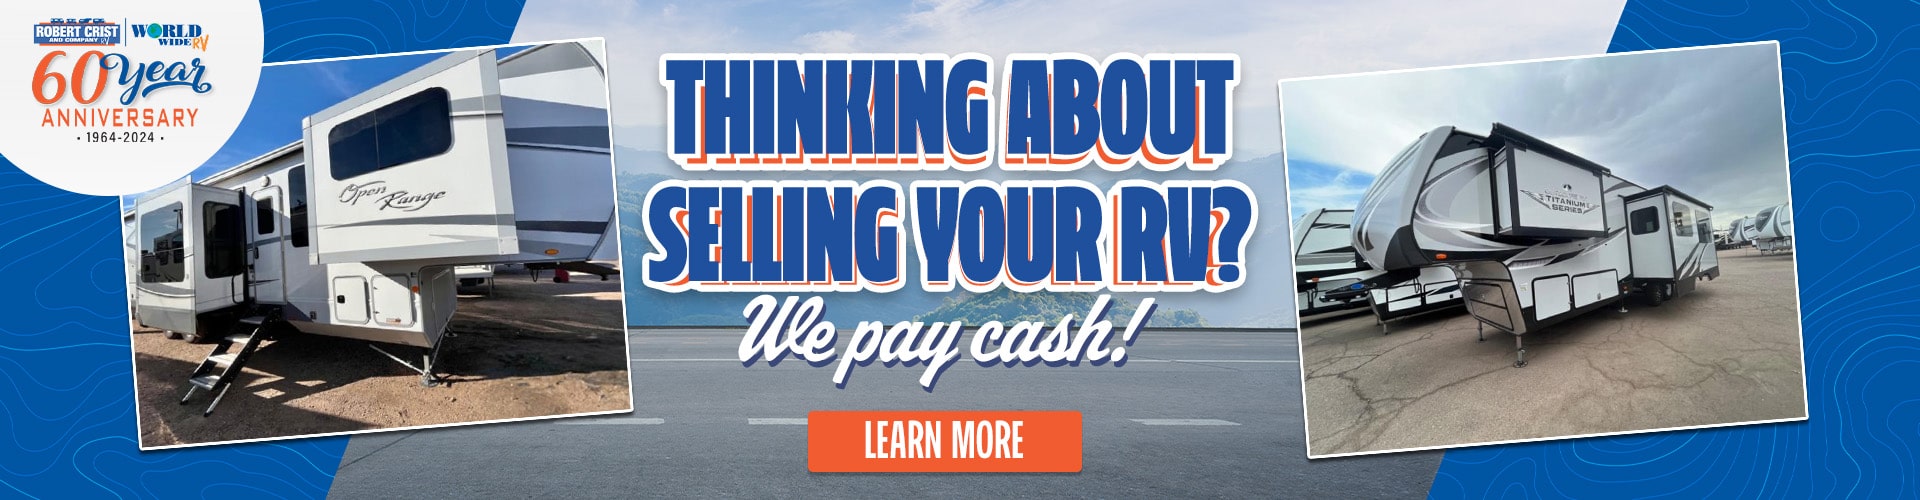 We pay cash for RVs!